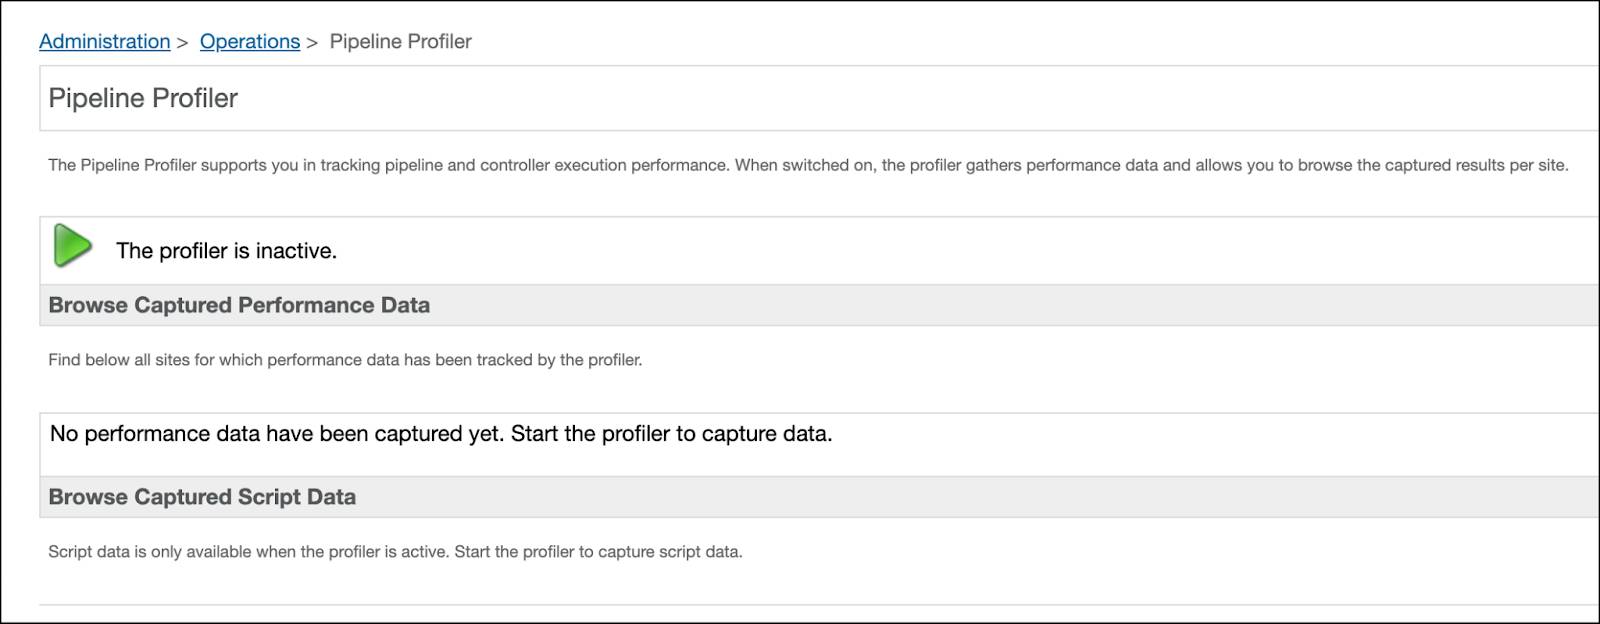 In Business Manager, the Pipeline Profiler page shows that the profiler is inactive.